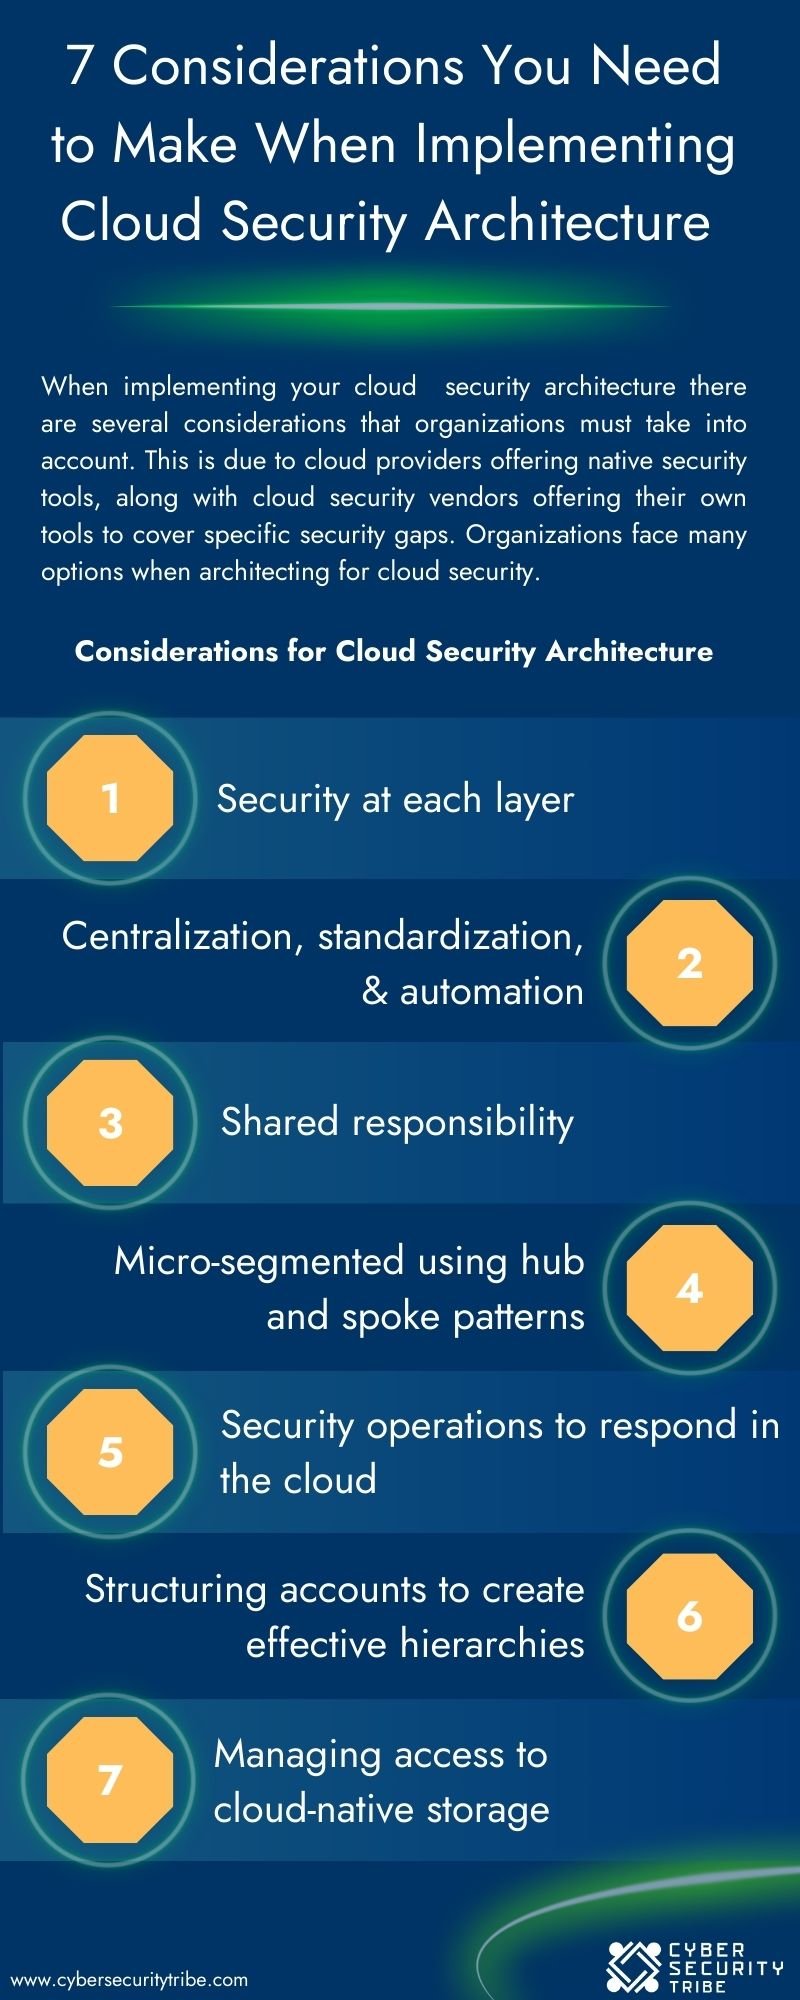 7 Considerations You Need to Make When Implementing Cloud Security Architecture 